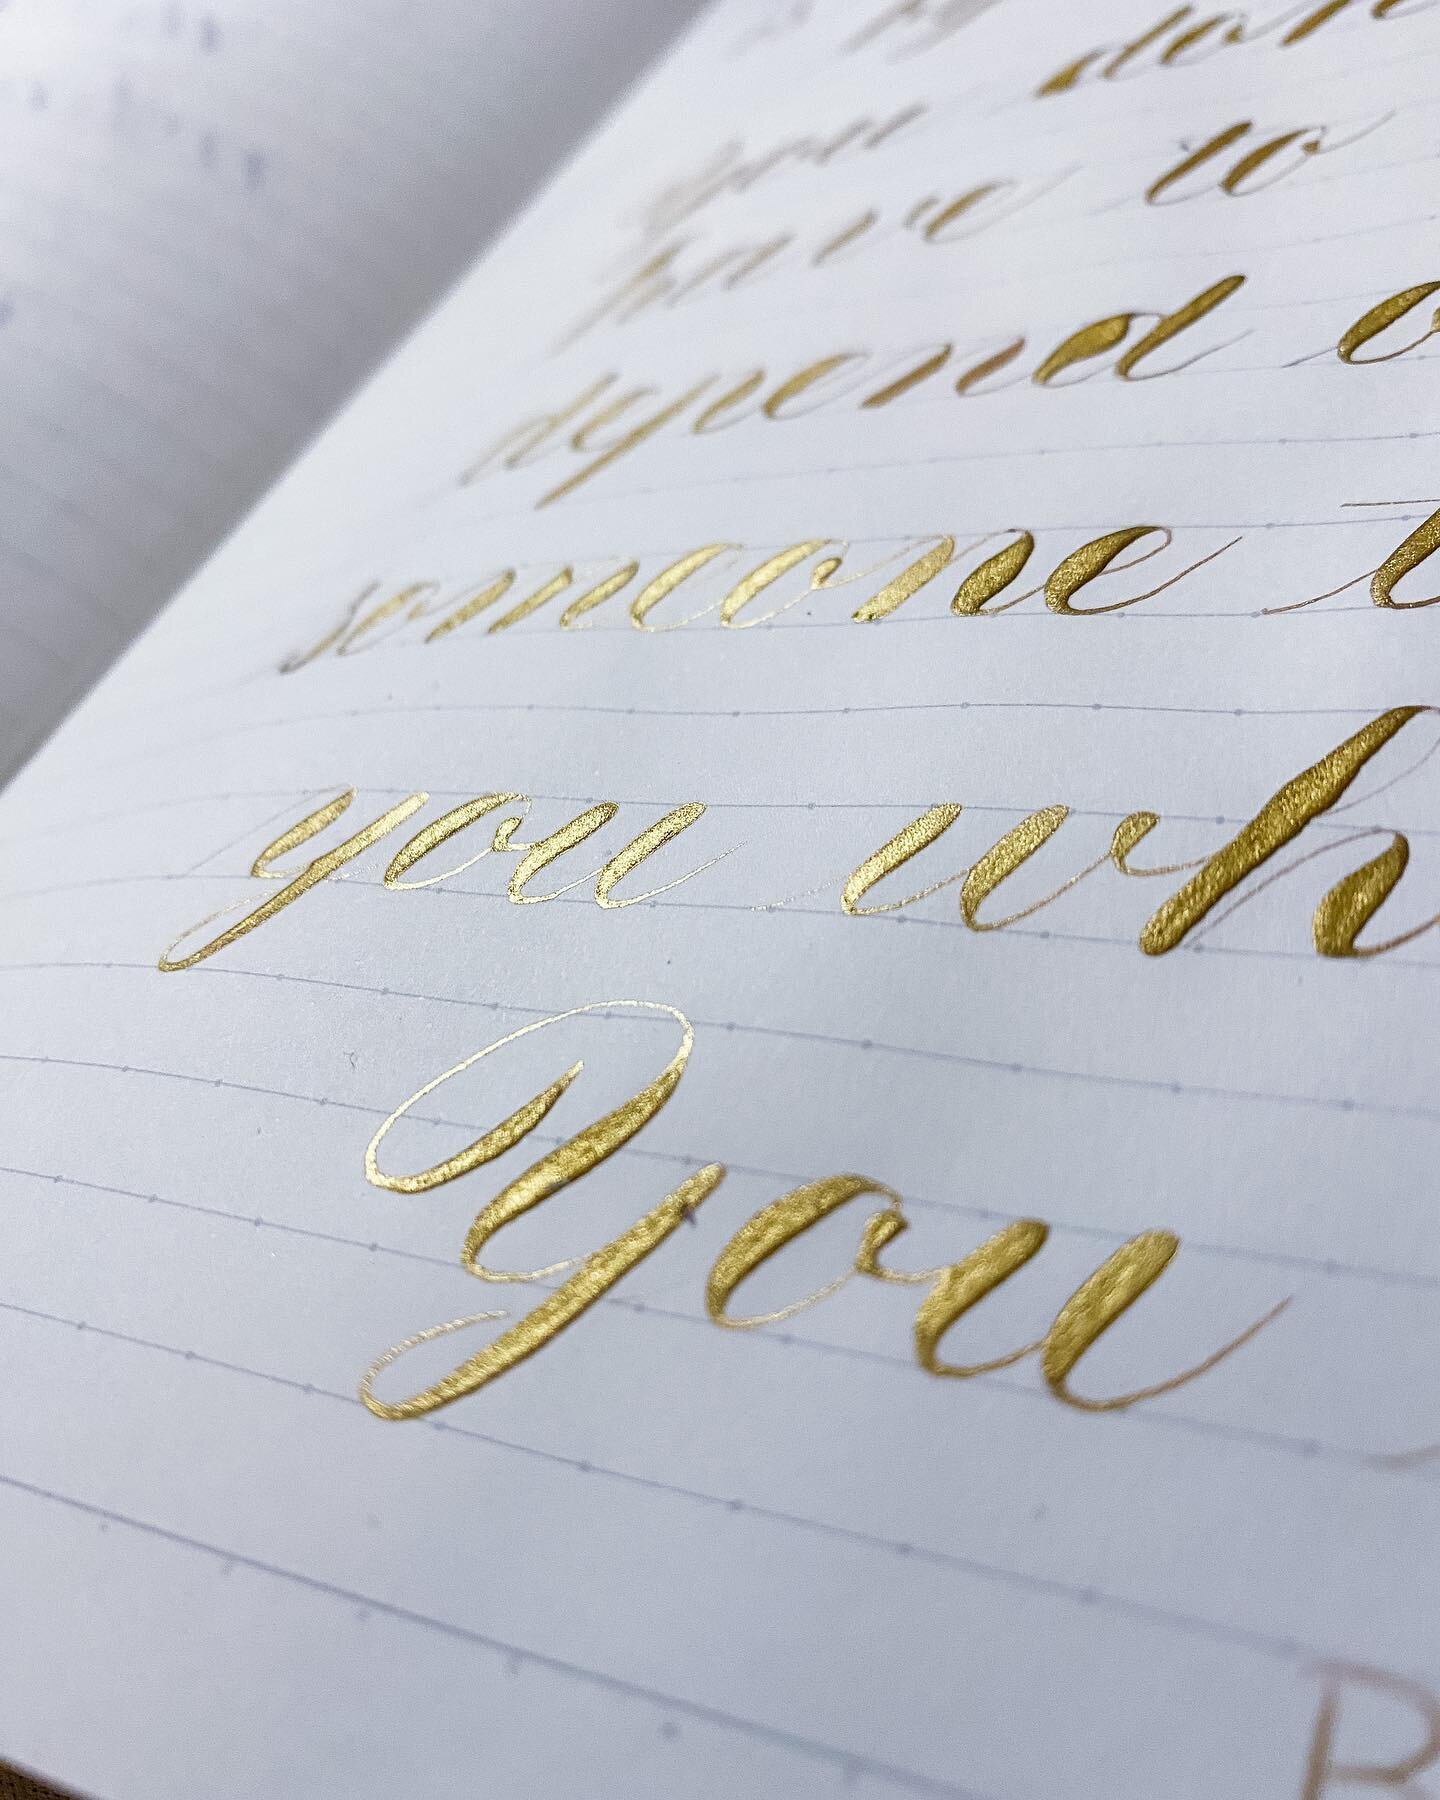 Oooh the shimmer of copperplate gold! Some calligraphy practice and introspection. It&rsquo;s fun rediscovering my supplies. I haven&rsquo;t used Dr PH Martin copperplate gold in a long time!! 💖
💖
💖
#copperplatepractice #practicemakesprogress #cop